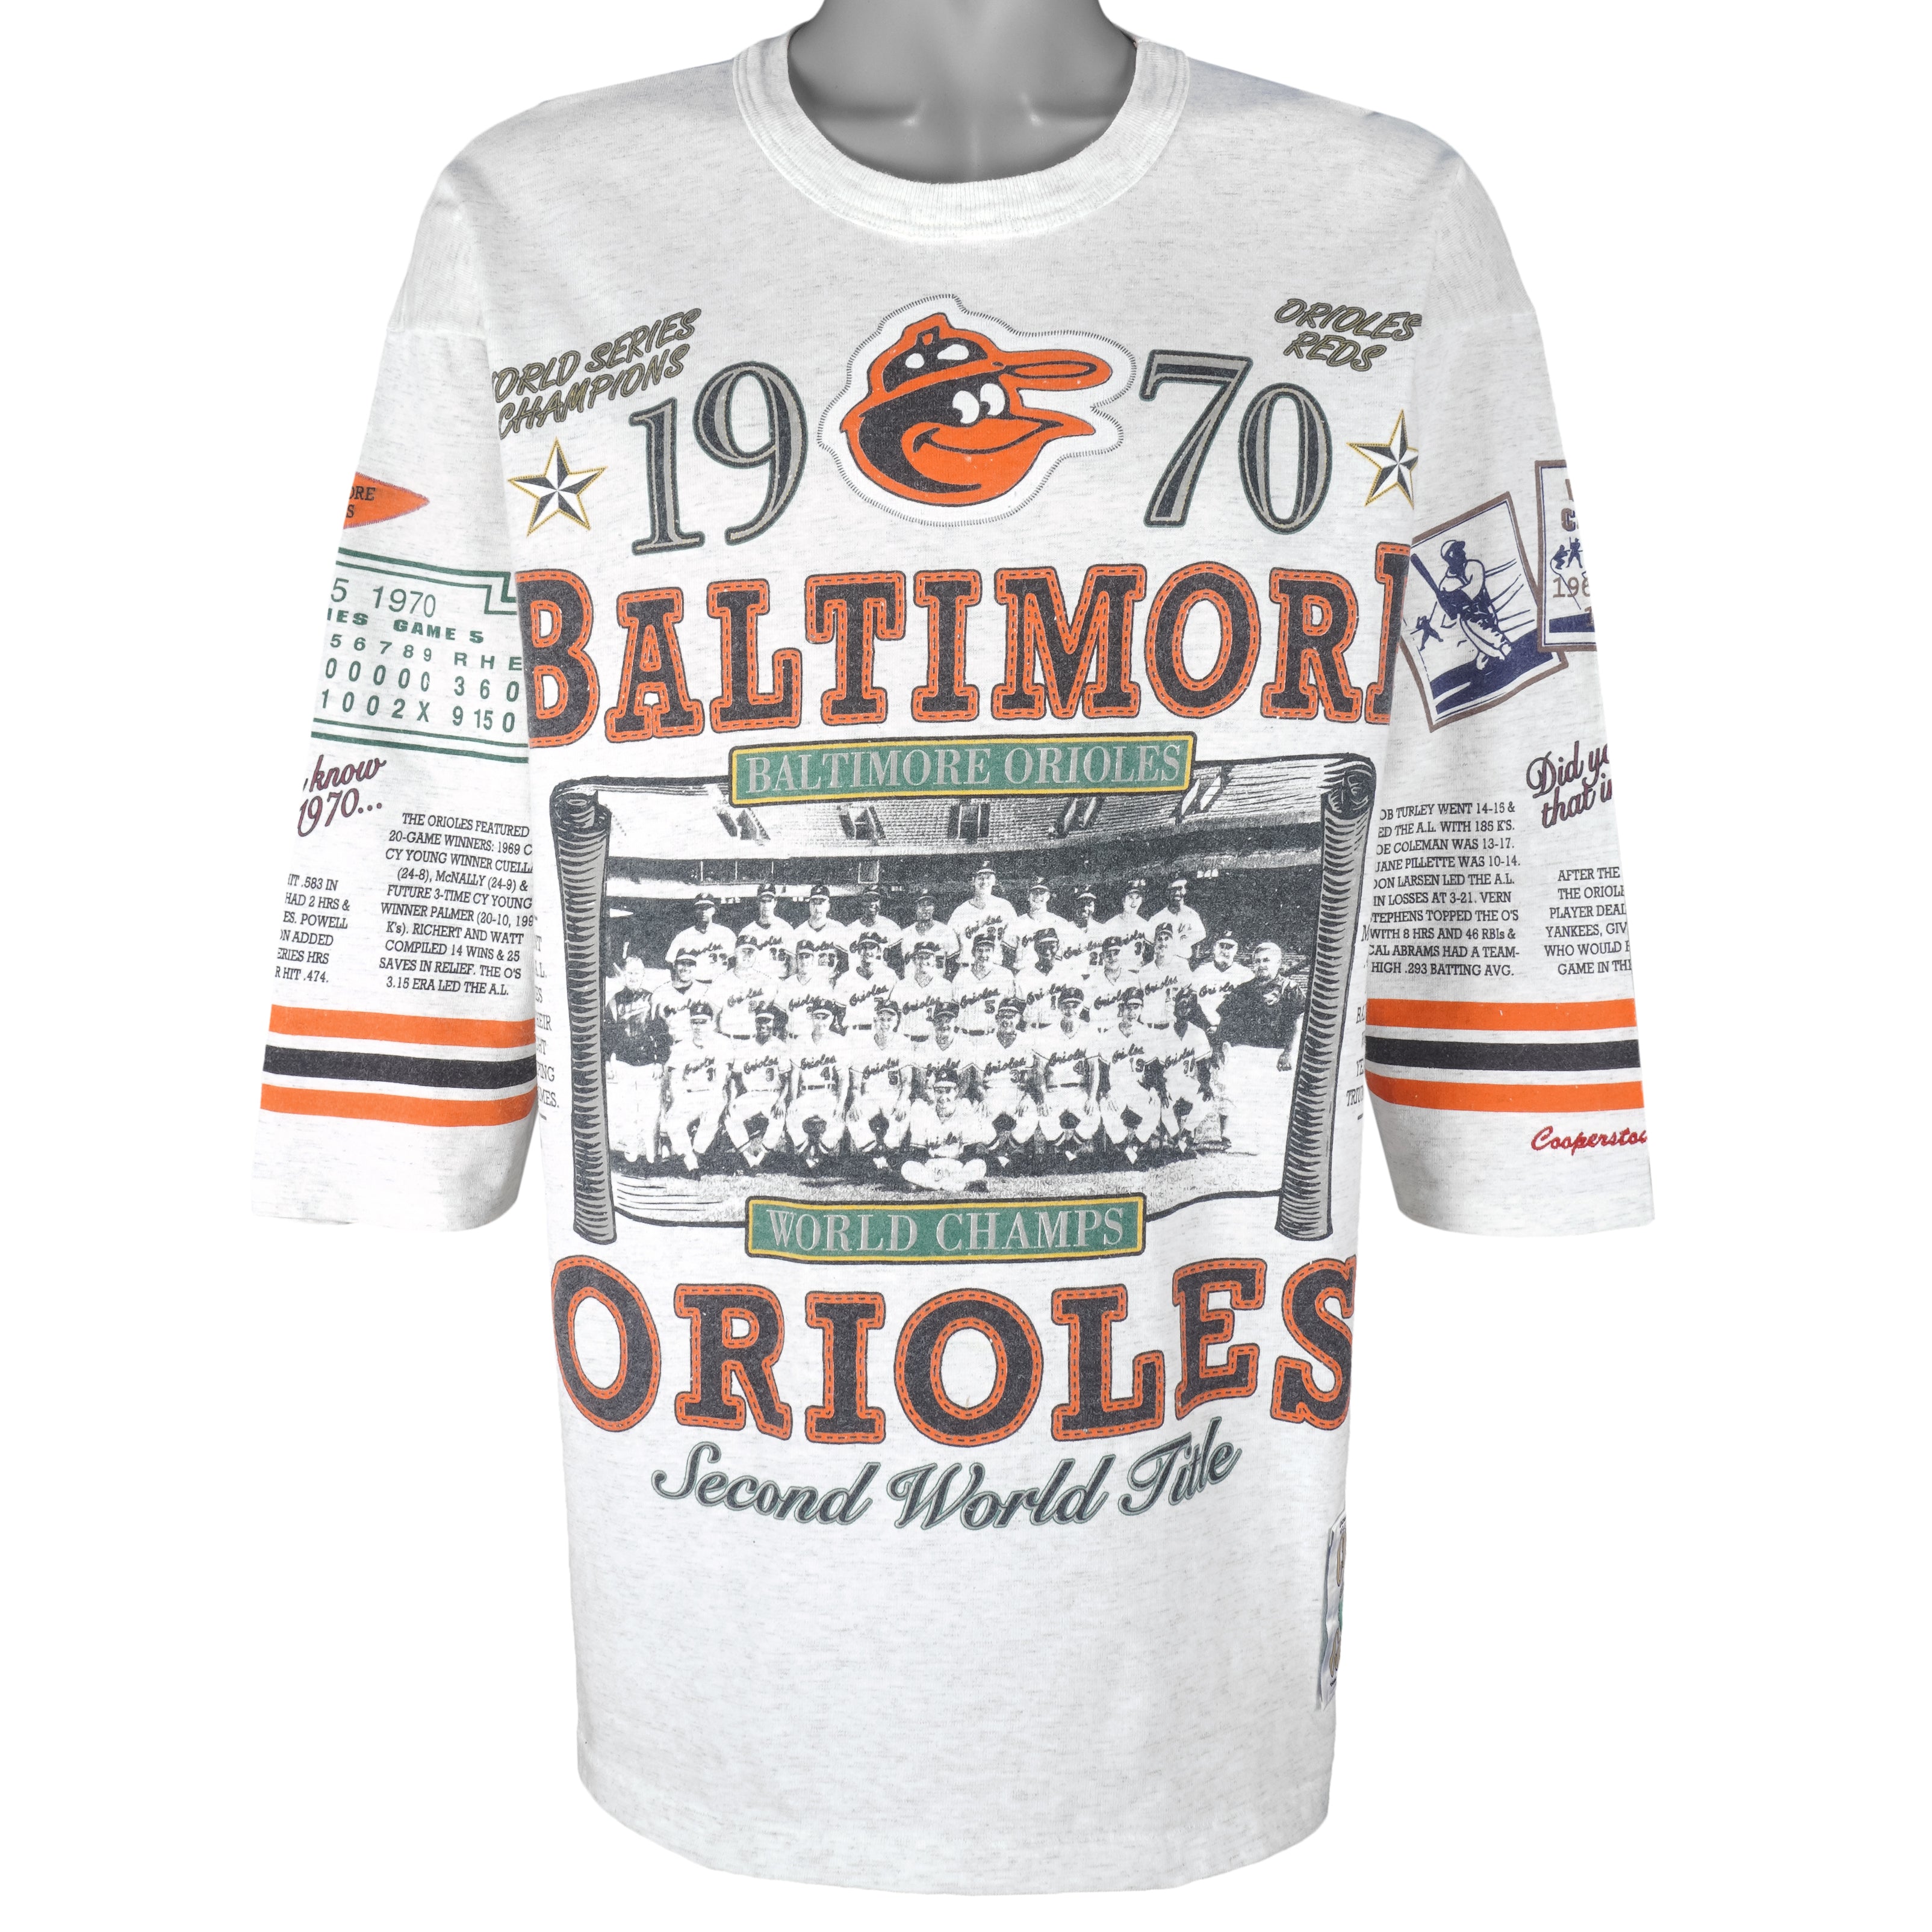 Vintage Baltimore Orioles 3/4 Sleeve T-shirt Large 1991 Gray 